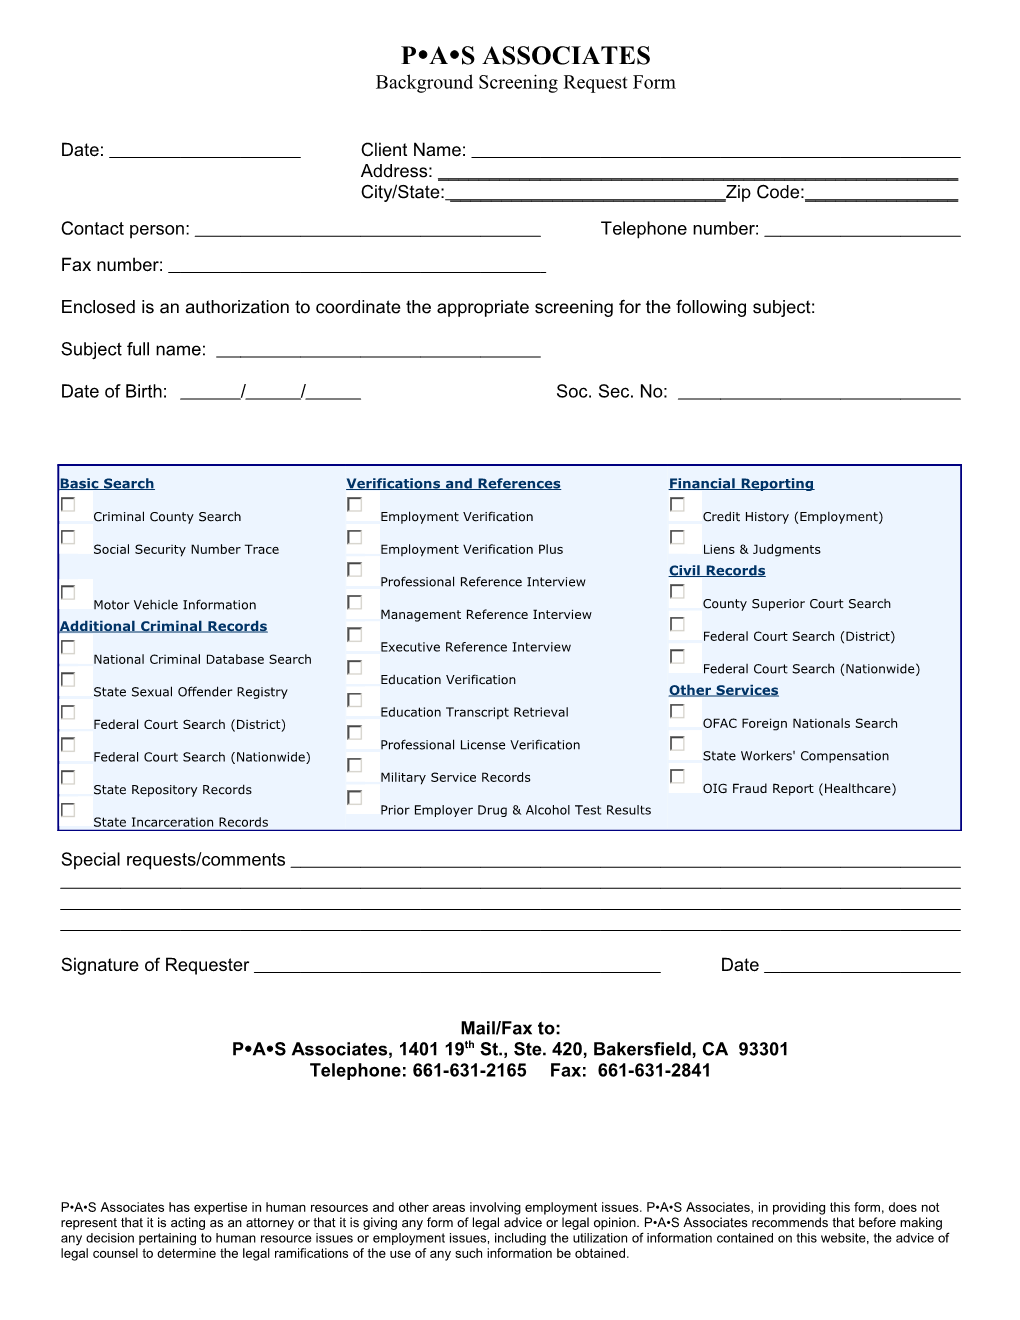 Background Screening Request Form